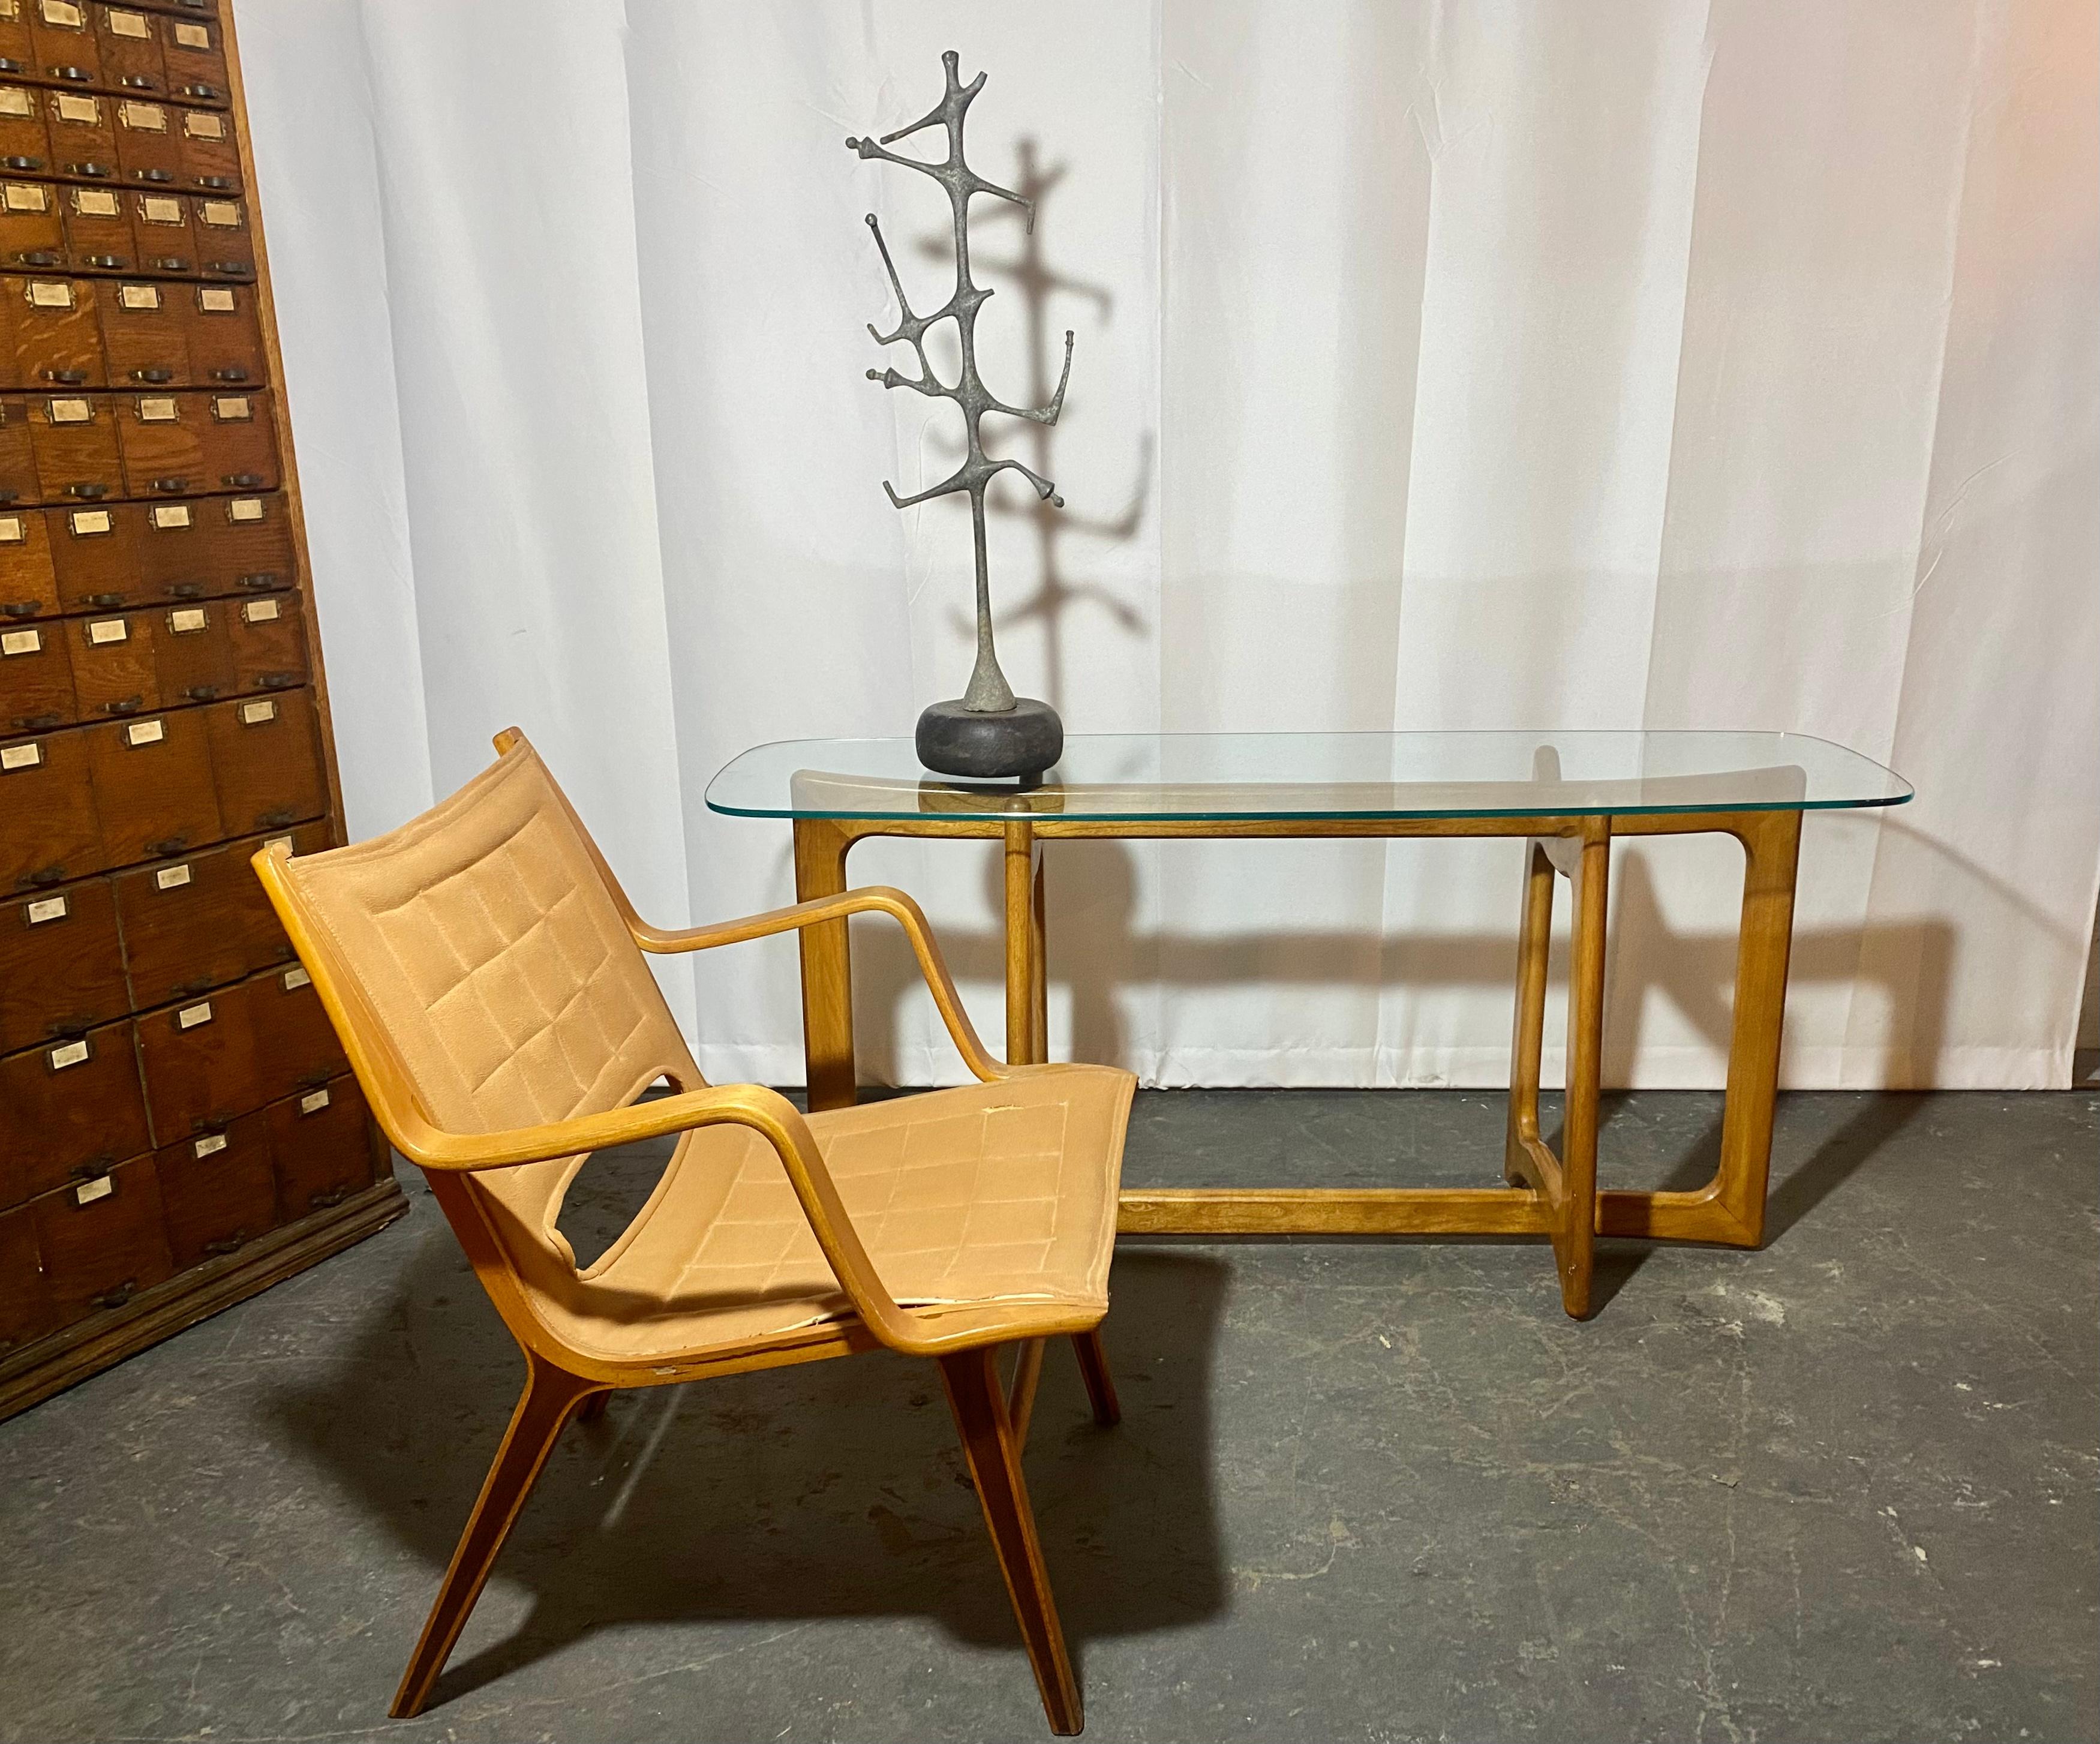 Seldom Seen sculptural walnut and glass Bowtie (Ribbon) console table designed by Adrian Pearsall classic Mid-Century Modern design excellent original condition. Would enhance any modern, contemporary, eclectic environment, hand delivery avail to